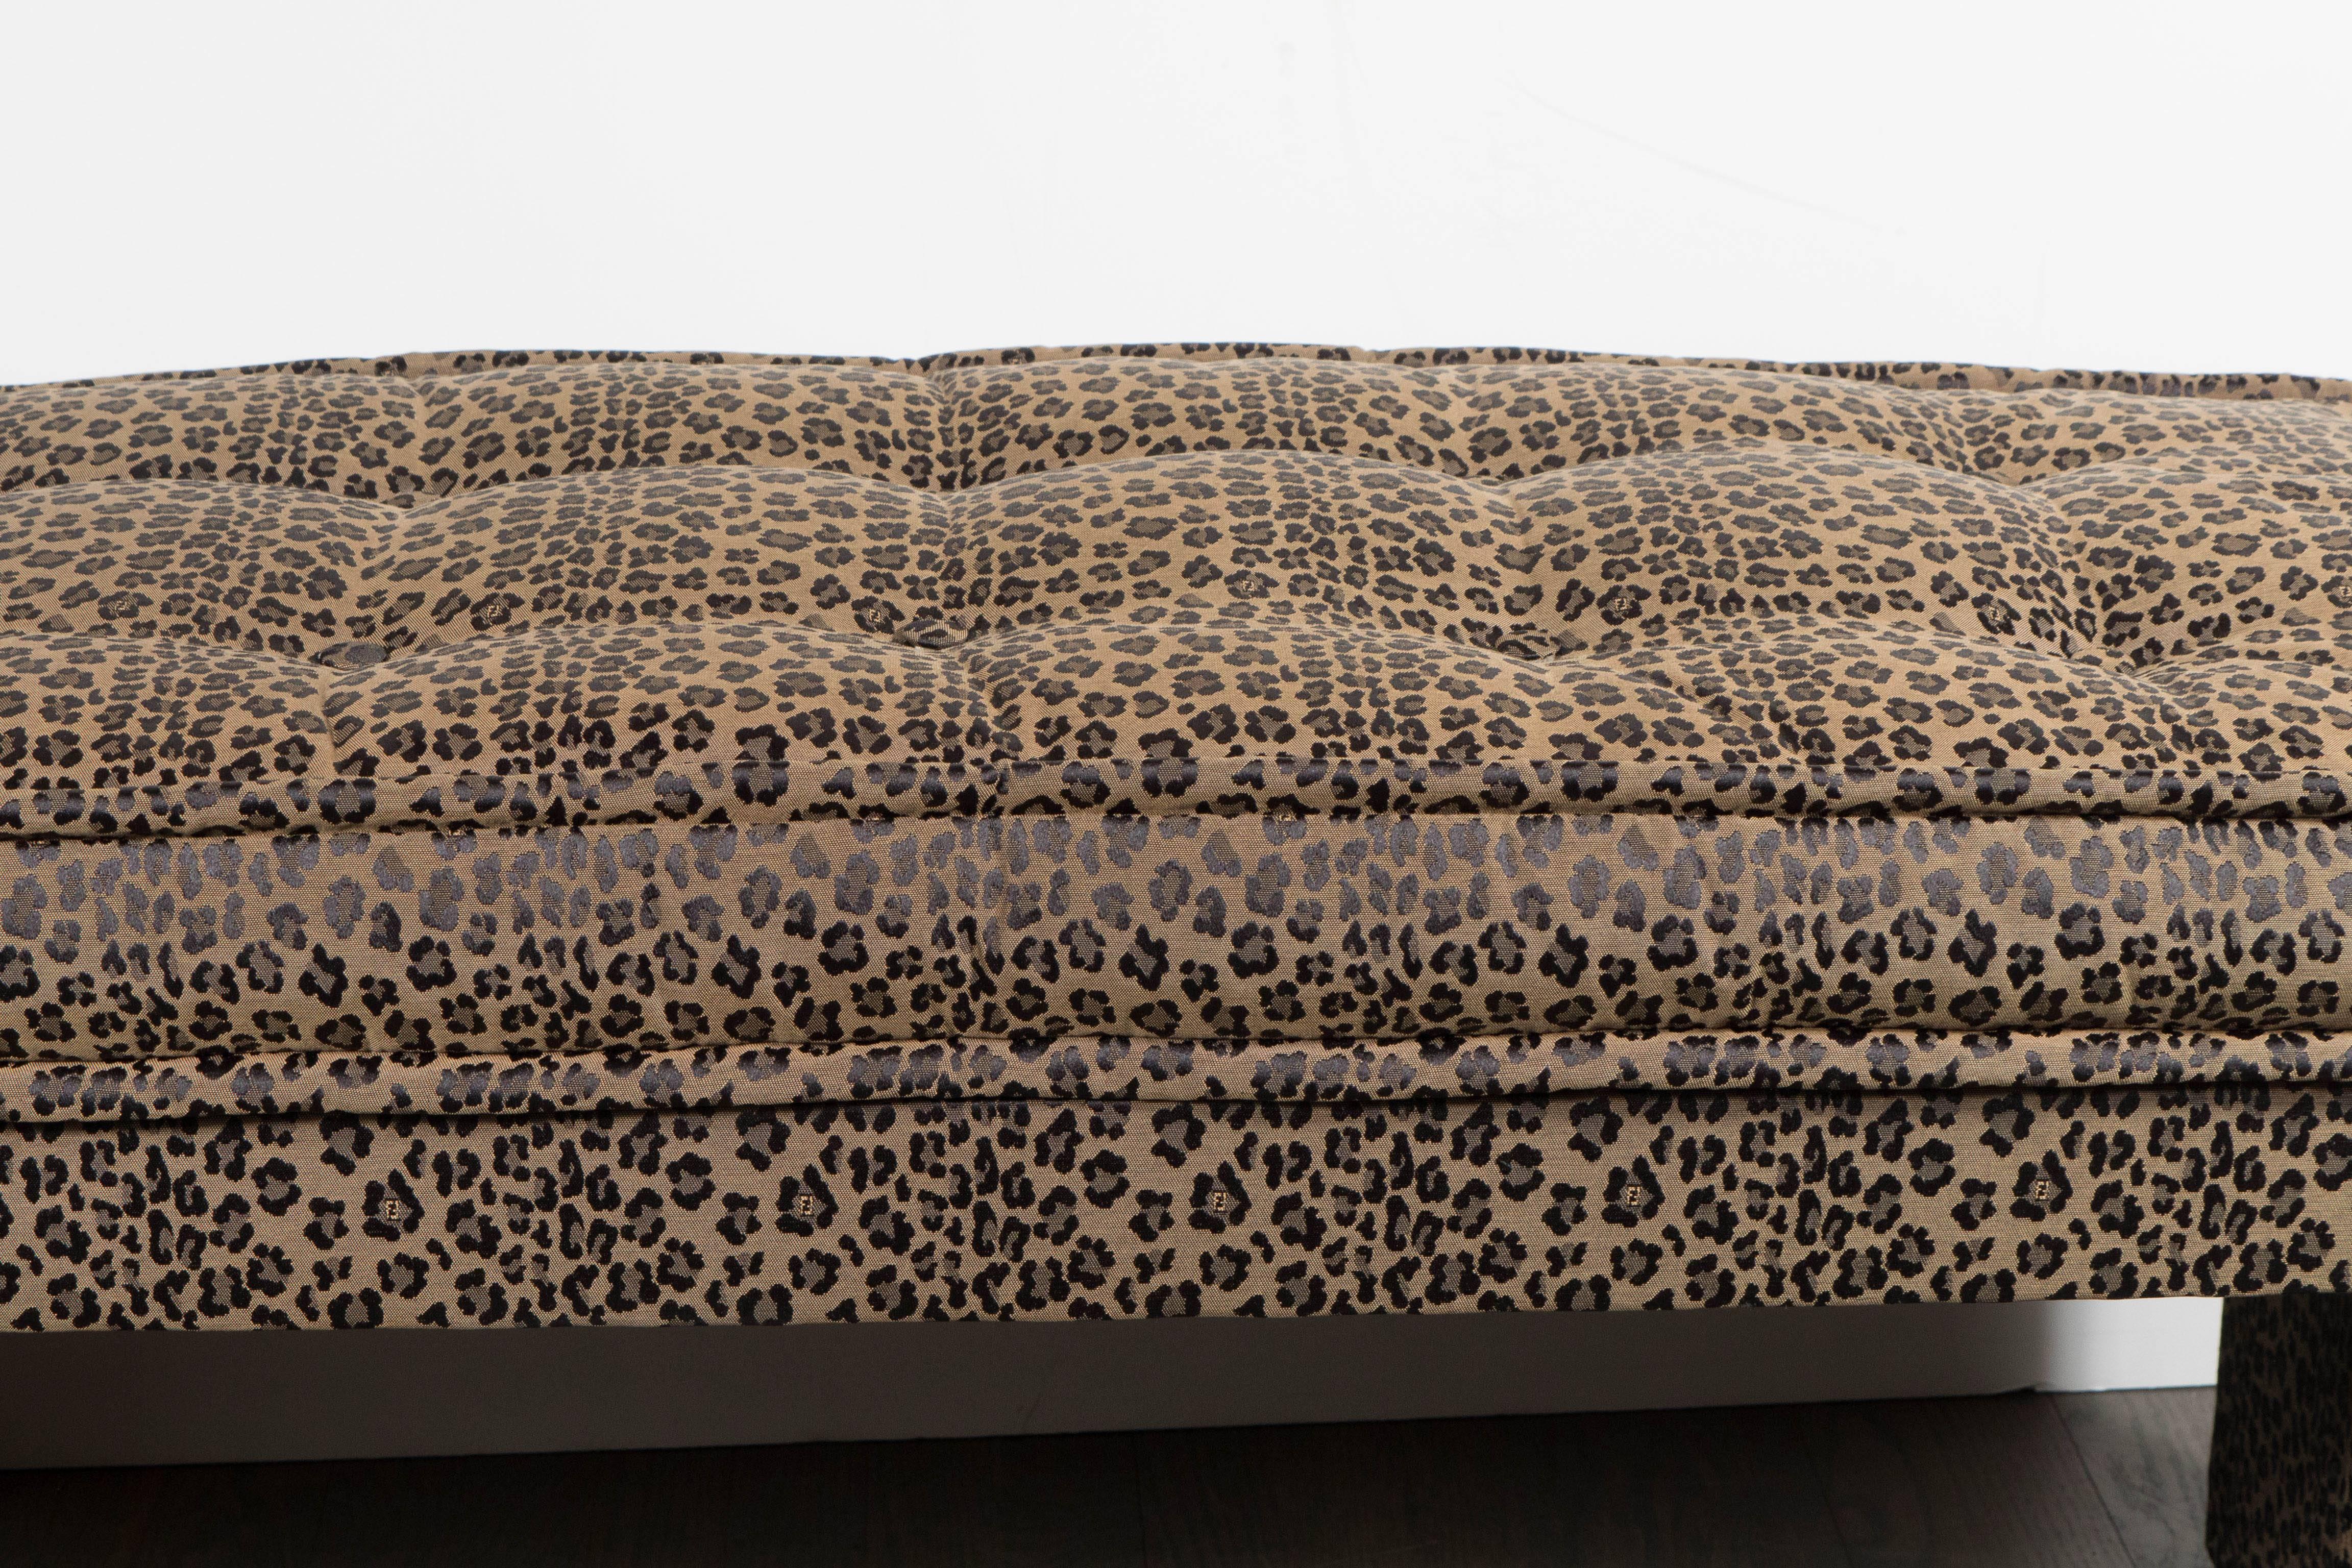 This stunning button-tufted bench produced by the fabled Italian design house Fendi. The piece's fun and confident upholstery recalls the joie de vivre of Italian, 1970s design at its best. It is upholstered in original Fendi leopard-print